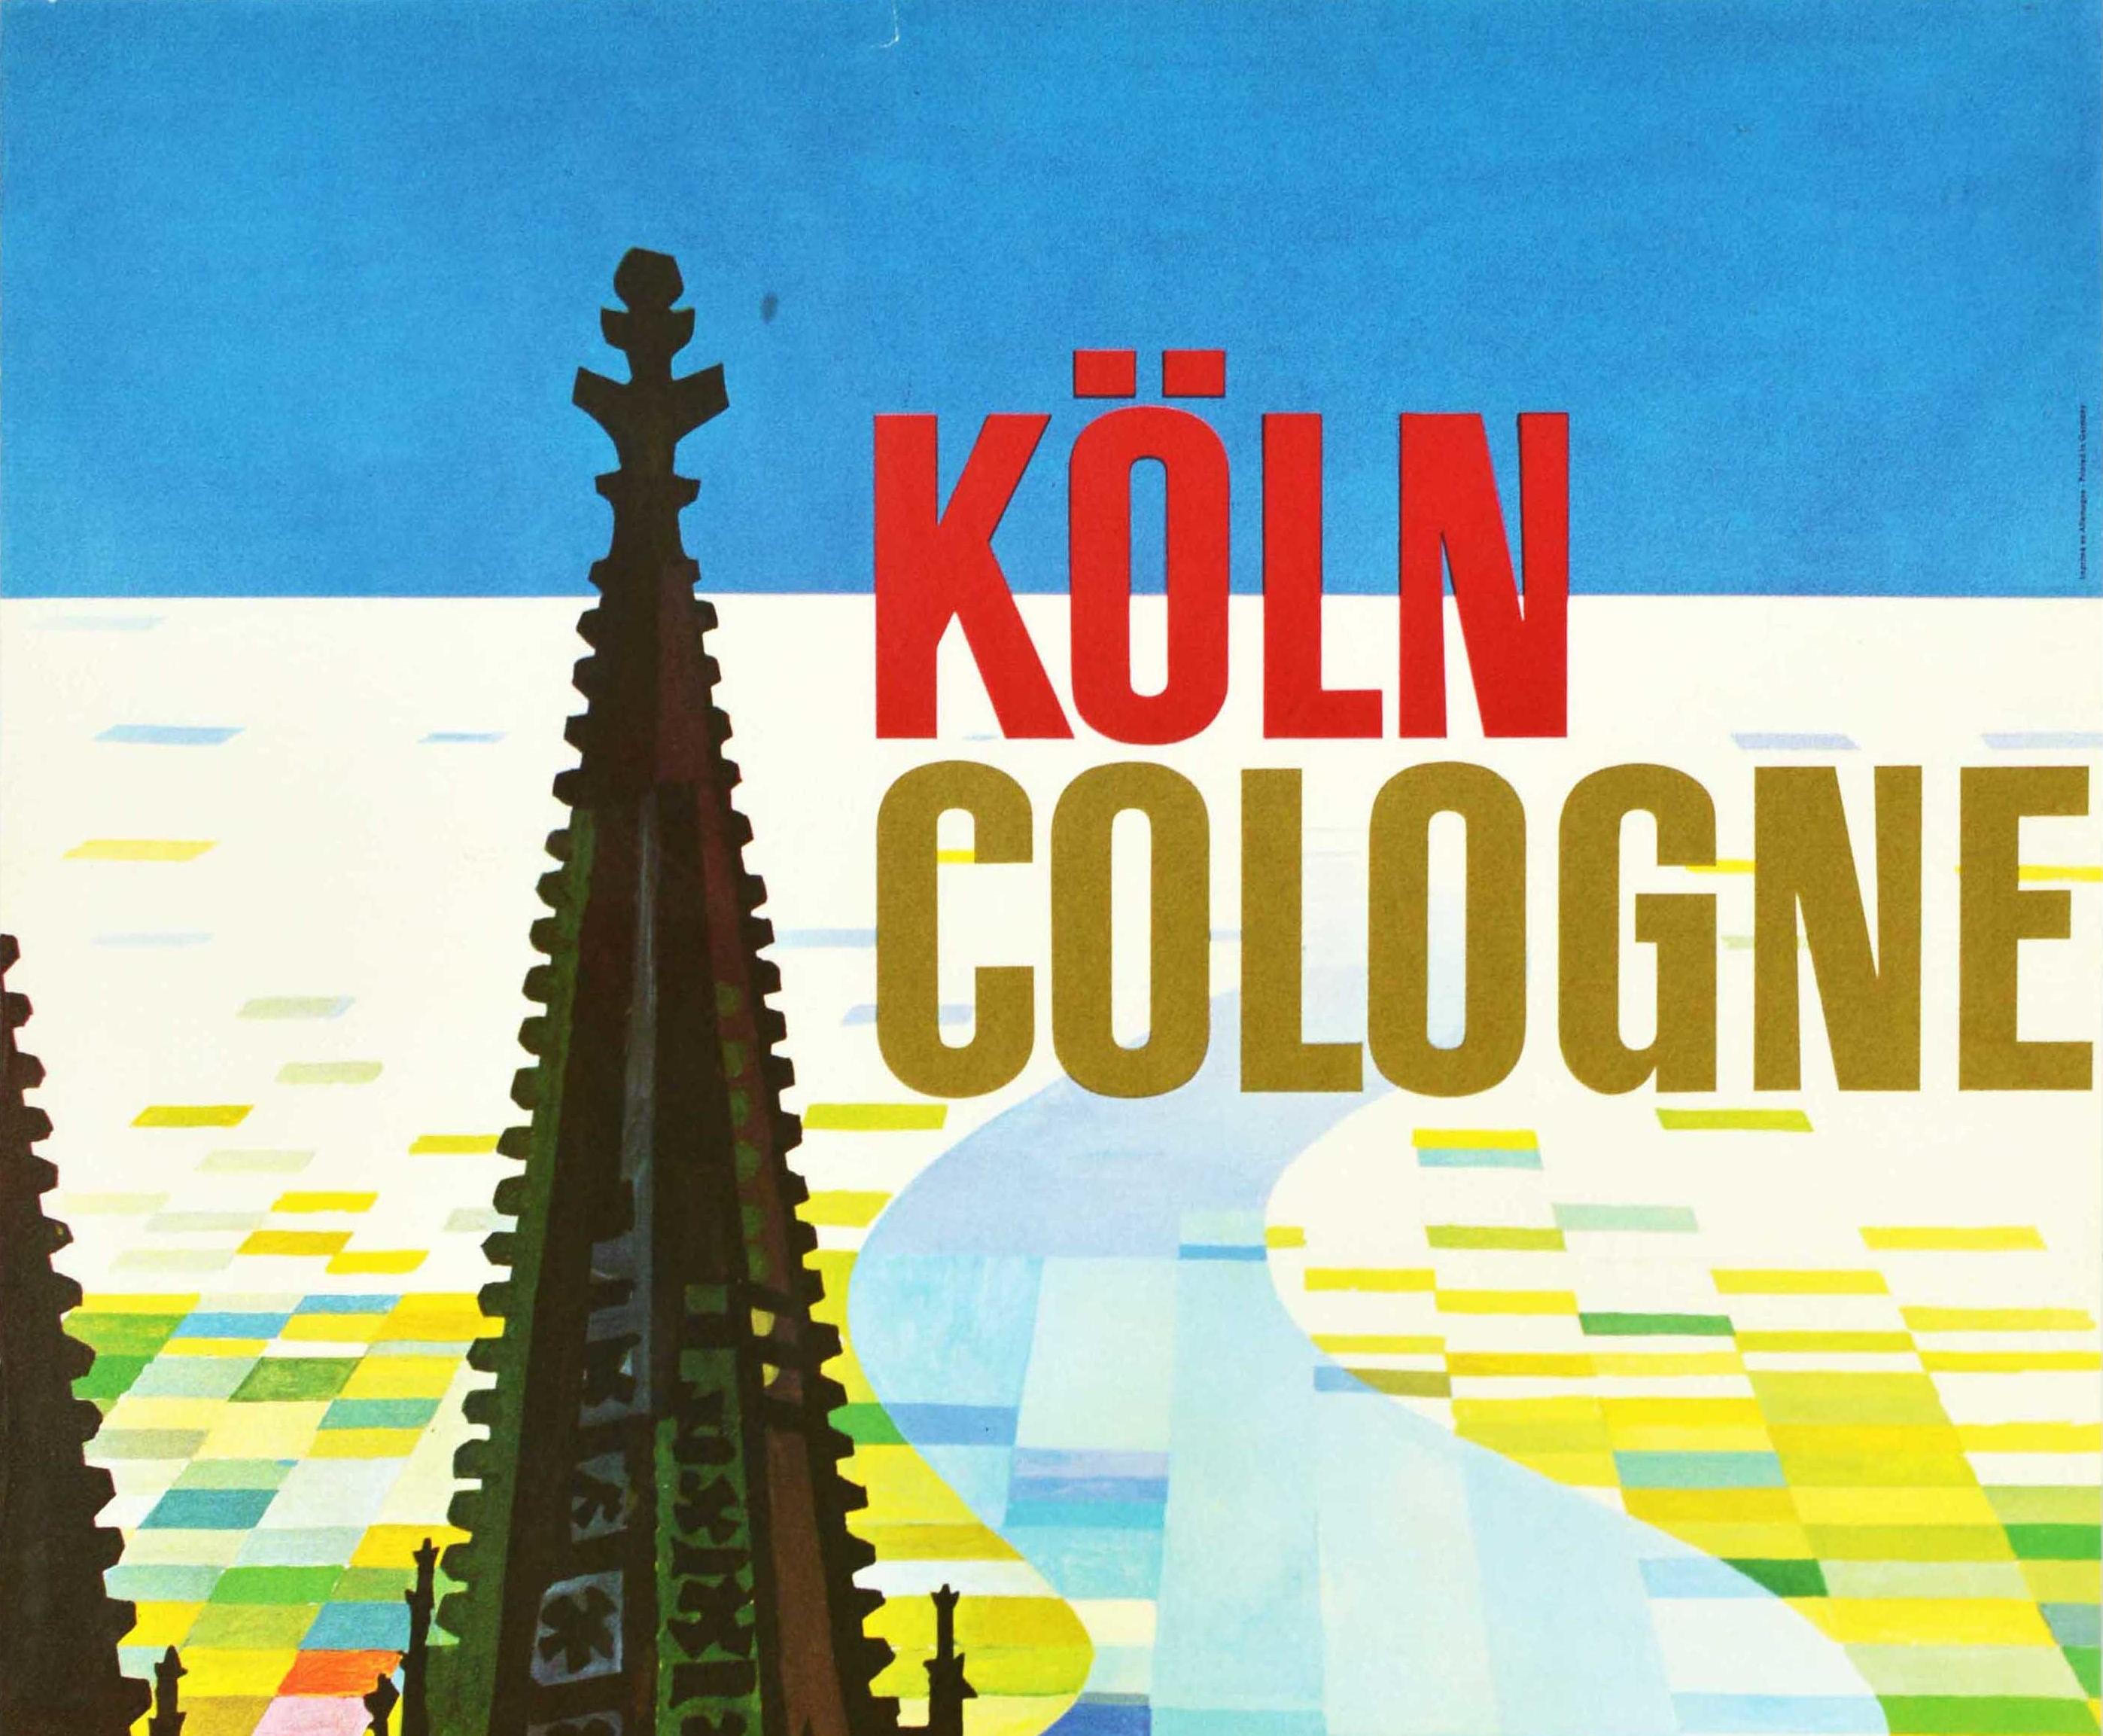 Original vintage travel poster for Koln / Cologne featuring a stunning mid-century illustration by the German artist Werner Labbe (1909-1989) depicting the Cathedral Church of Saint Peter towering over the colourful banks of the city with boats on